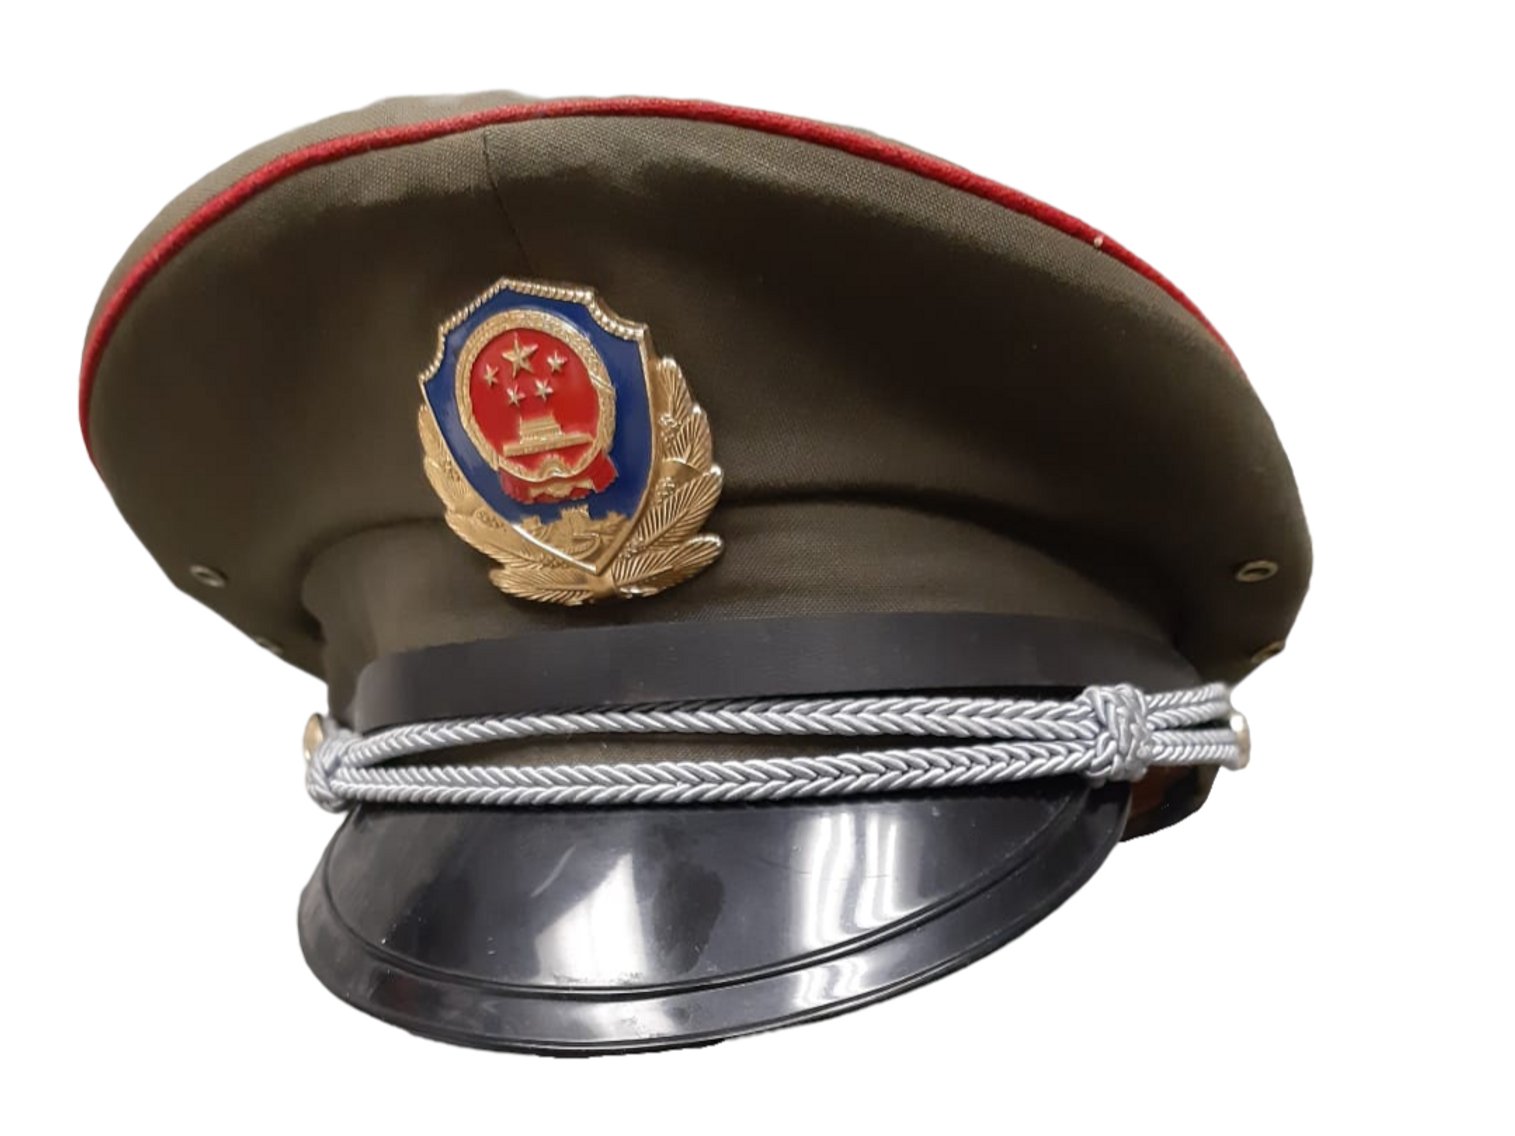 Chinese National Police Uniform Cap with Badge